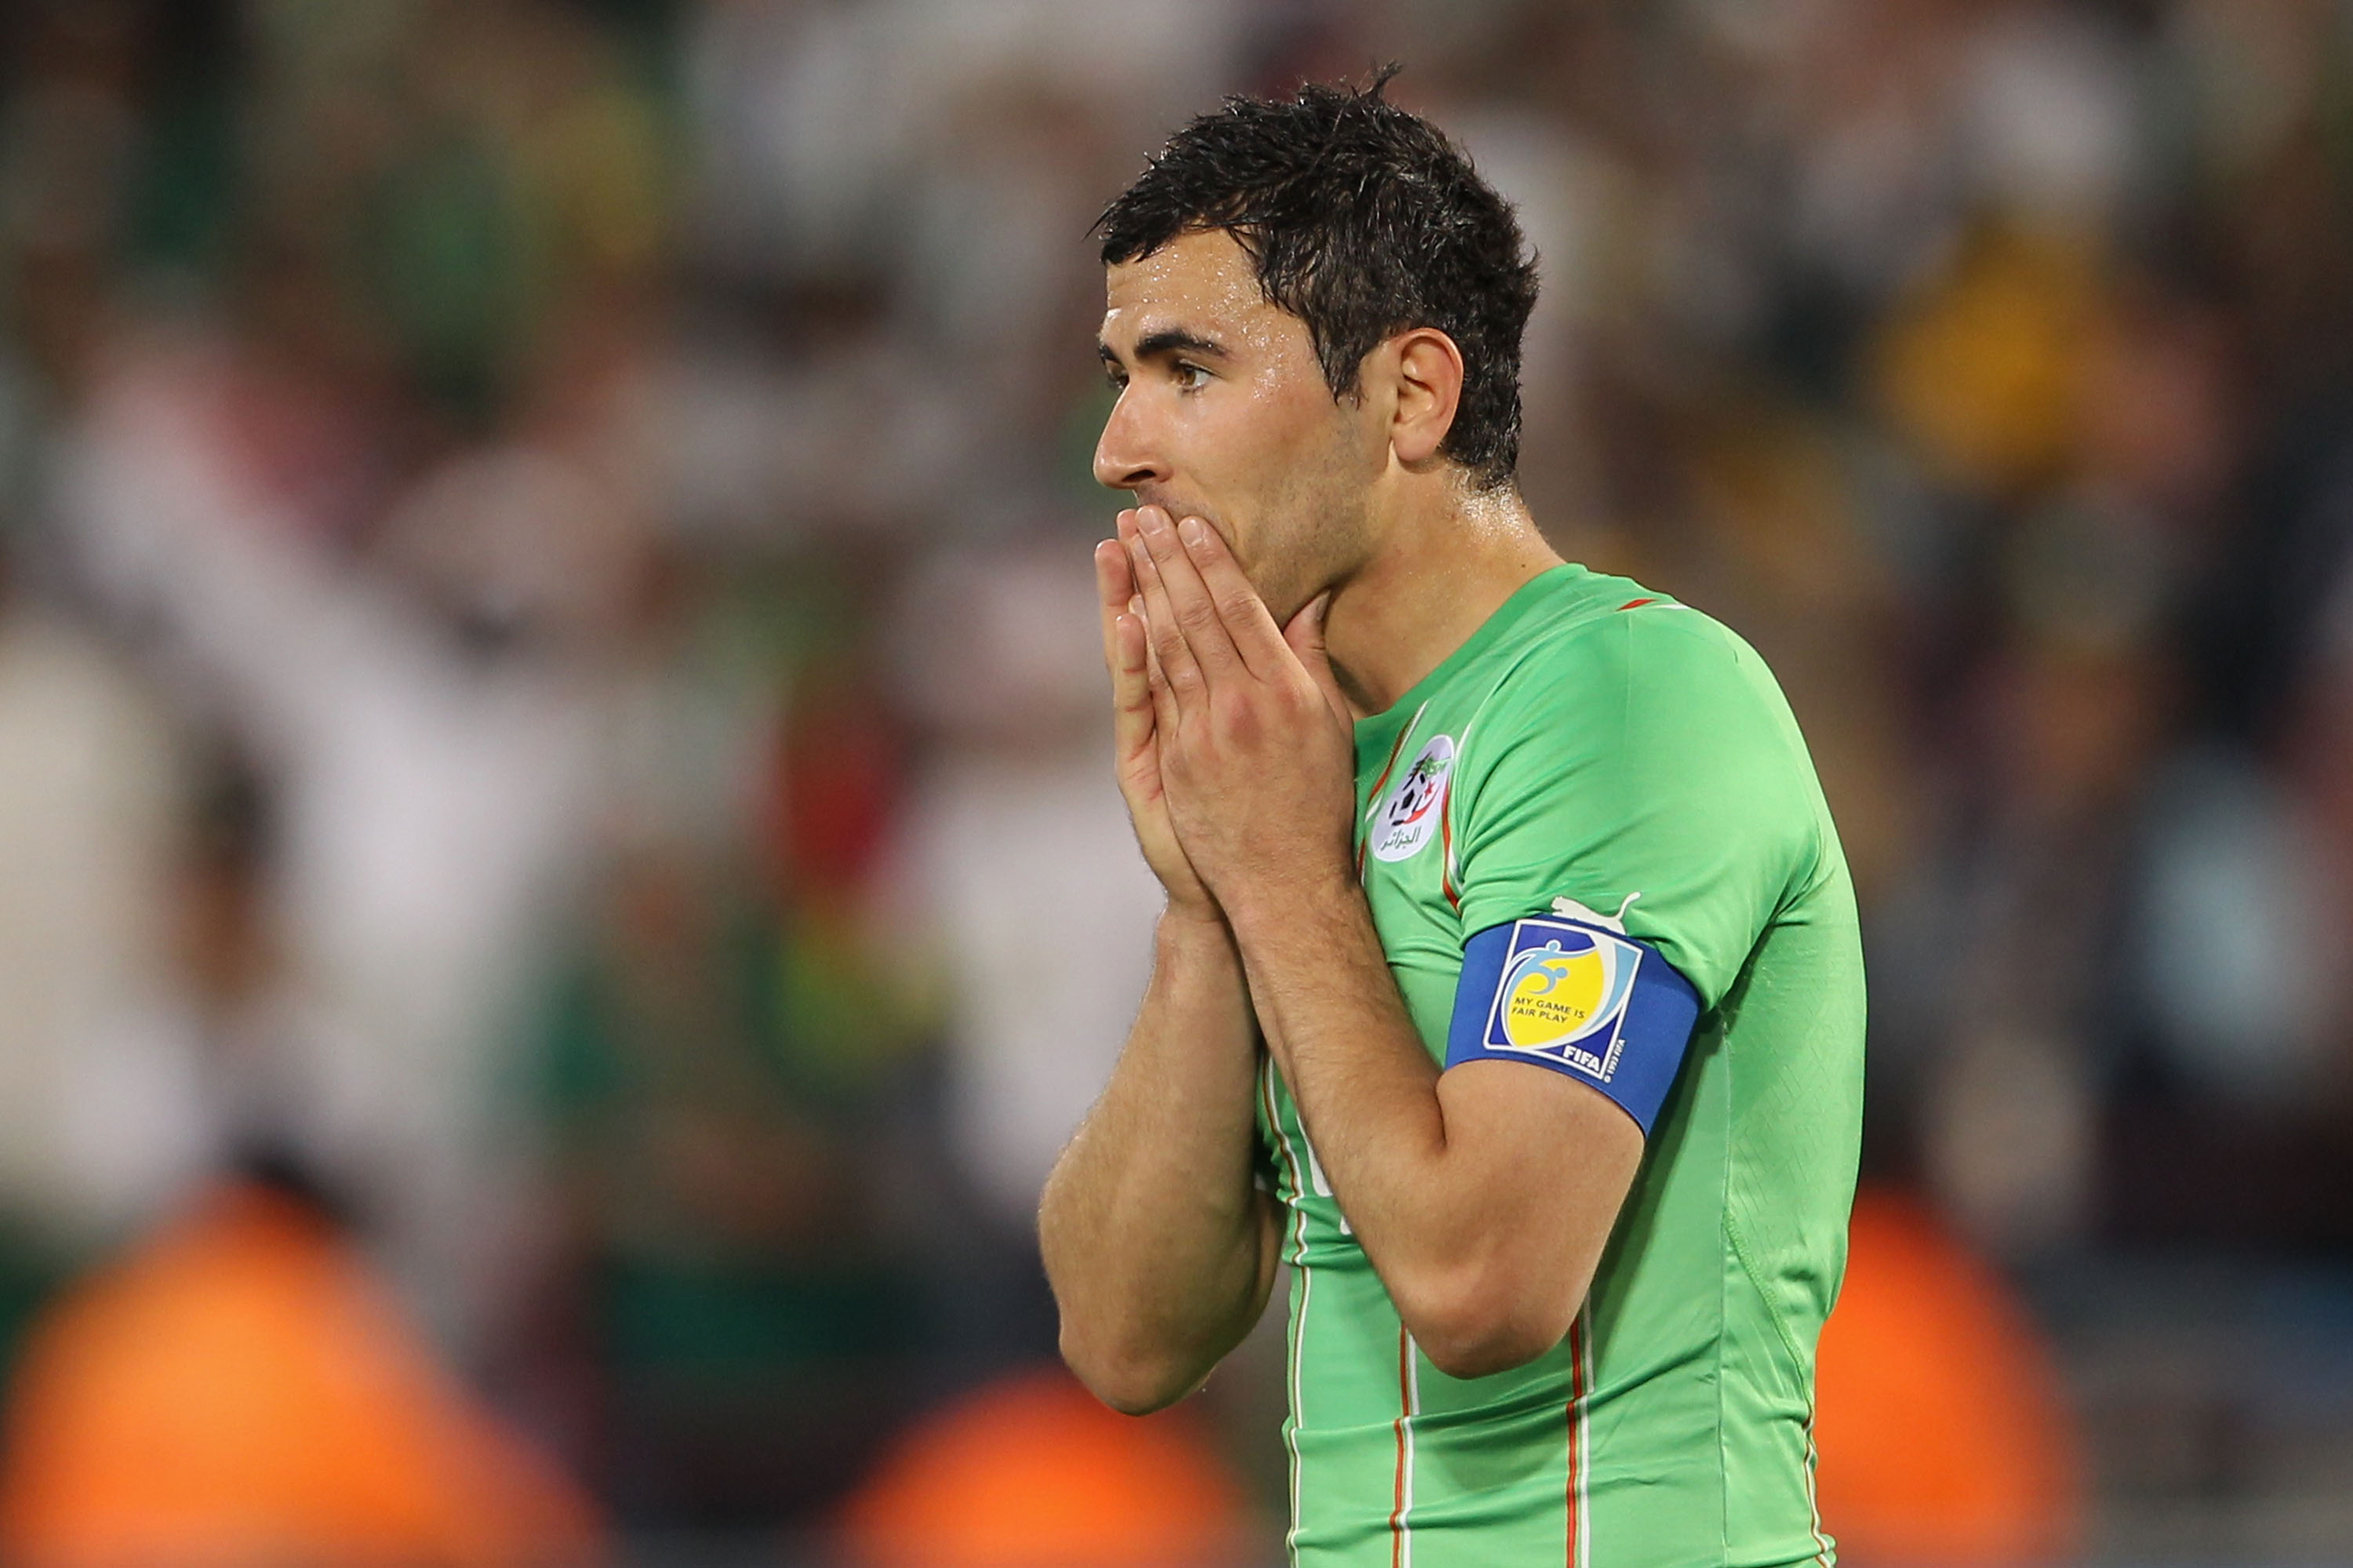 PRETORIA, SOUTH AFRICA - JUNE 23:  Anther Yahia of Algeria reacts during the 2010 FIFA World Cup South Africa Group C match between USA and Algeria at the Loftus Versfeld Stadium on June 23, 2010 in Tshwane/Pretoria, South Africa.  (Photo by Phil Cole/Get